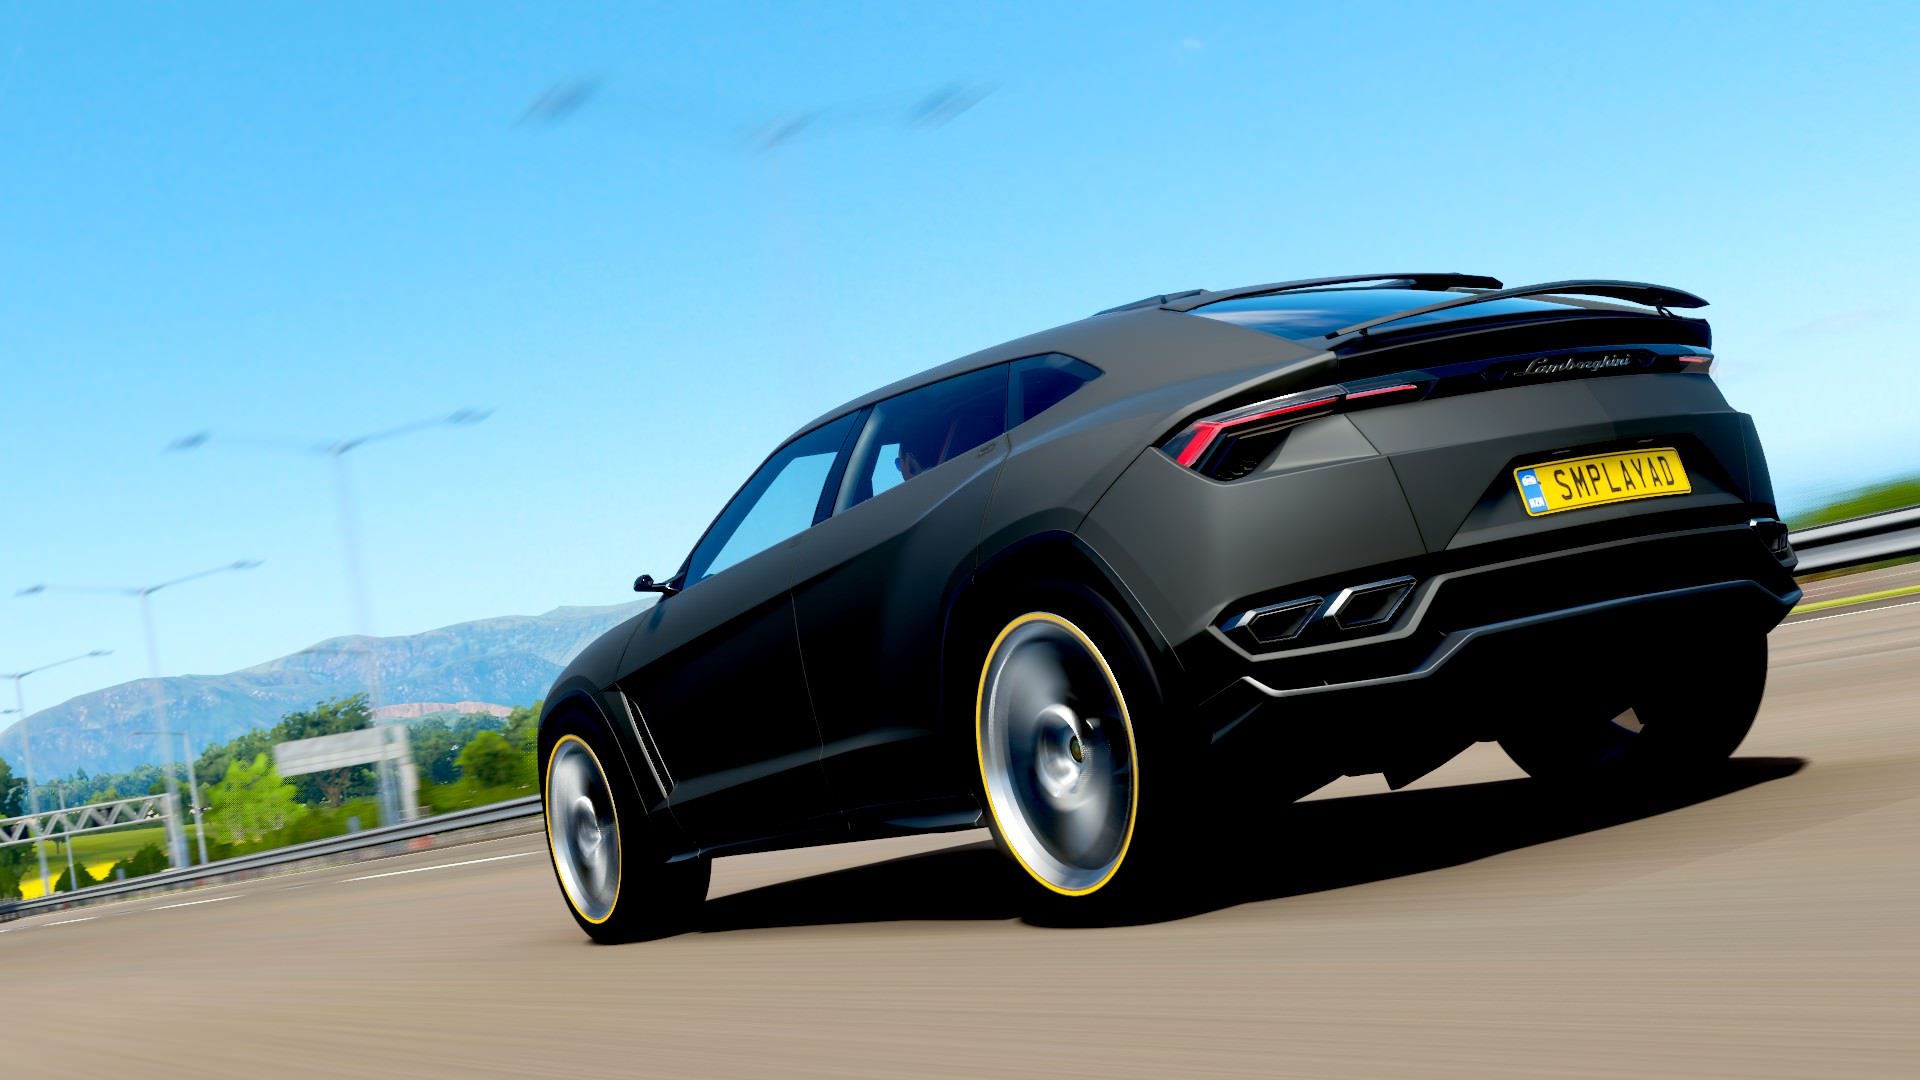 This week's Trial for the Huracan Performante has been challenged by this amazing Urus Concept